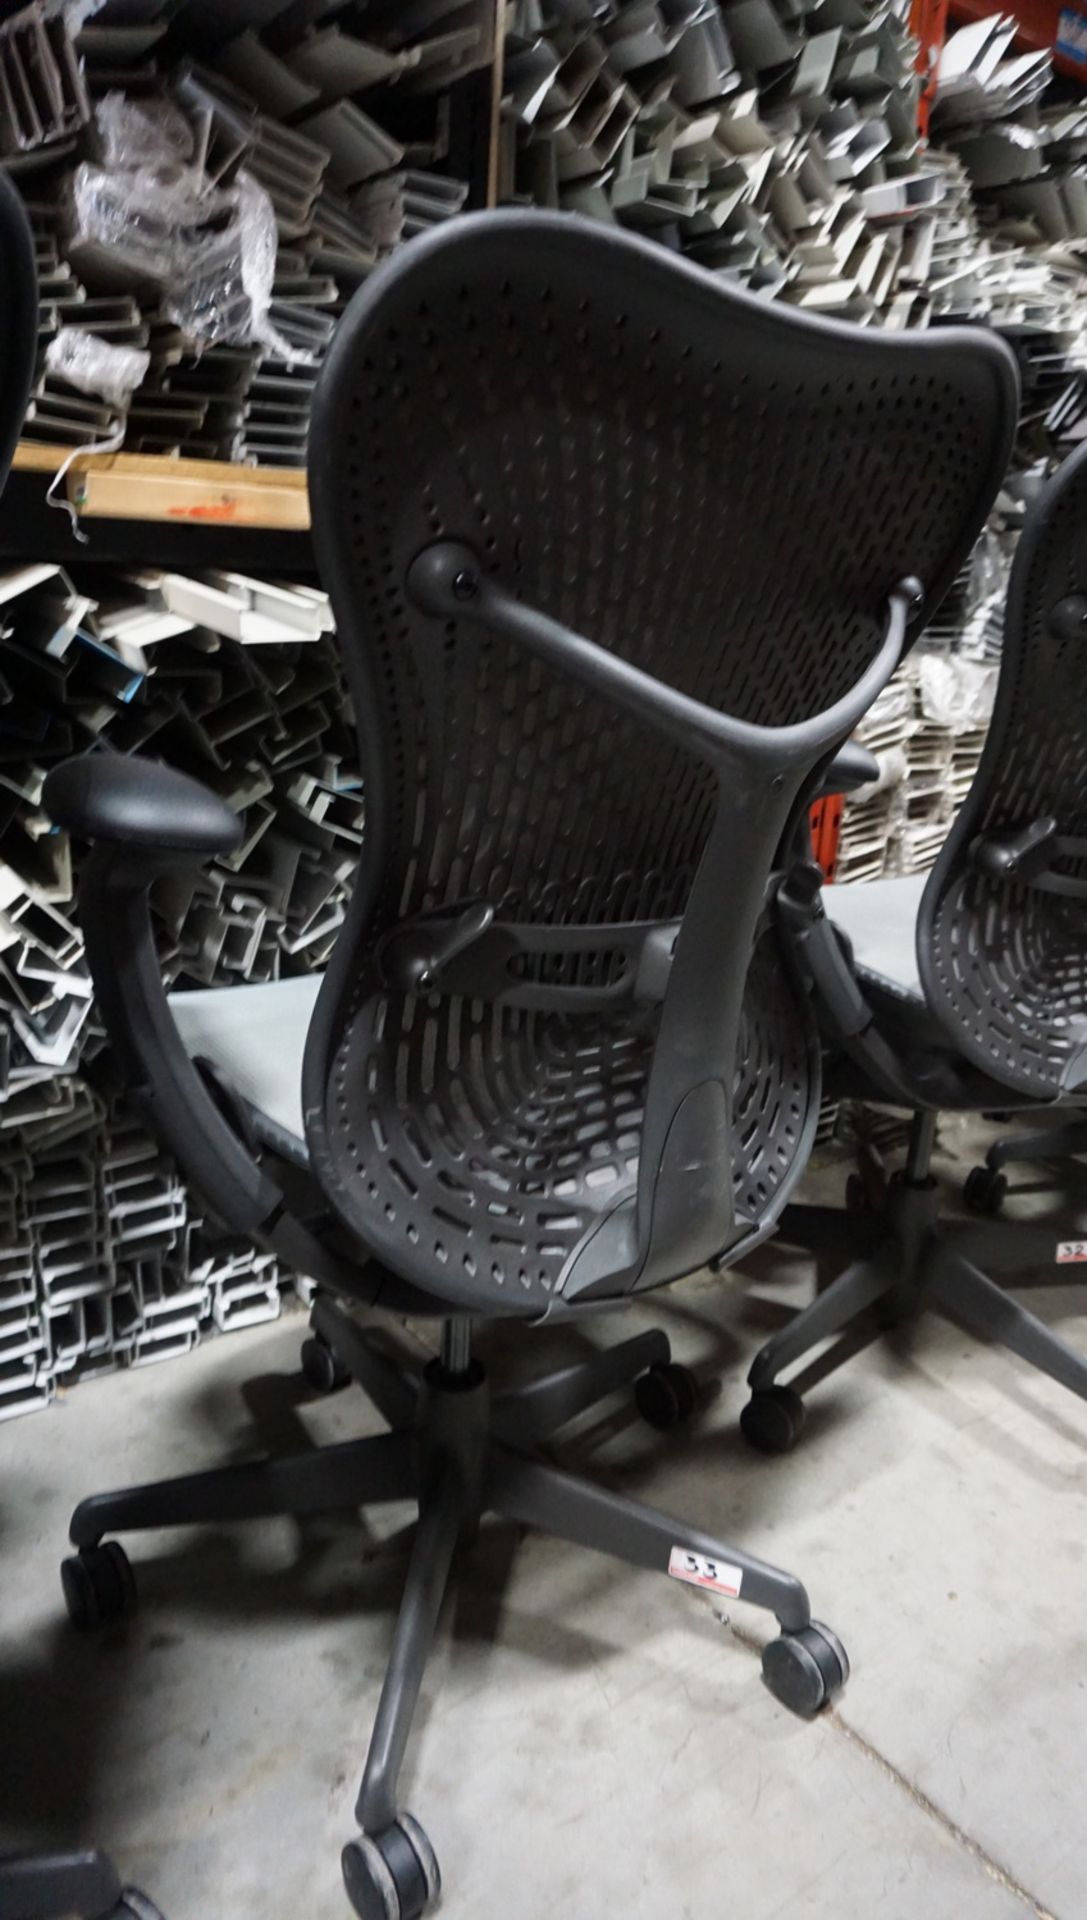 HERMAN MILLER MIRRA 1 OFFICE CHAIR W/ LUMBAR SUPPORT, BACK LOCK, ARM / SEAT ADJUSTMENTS - Image 2 of 2